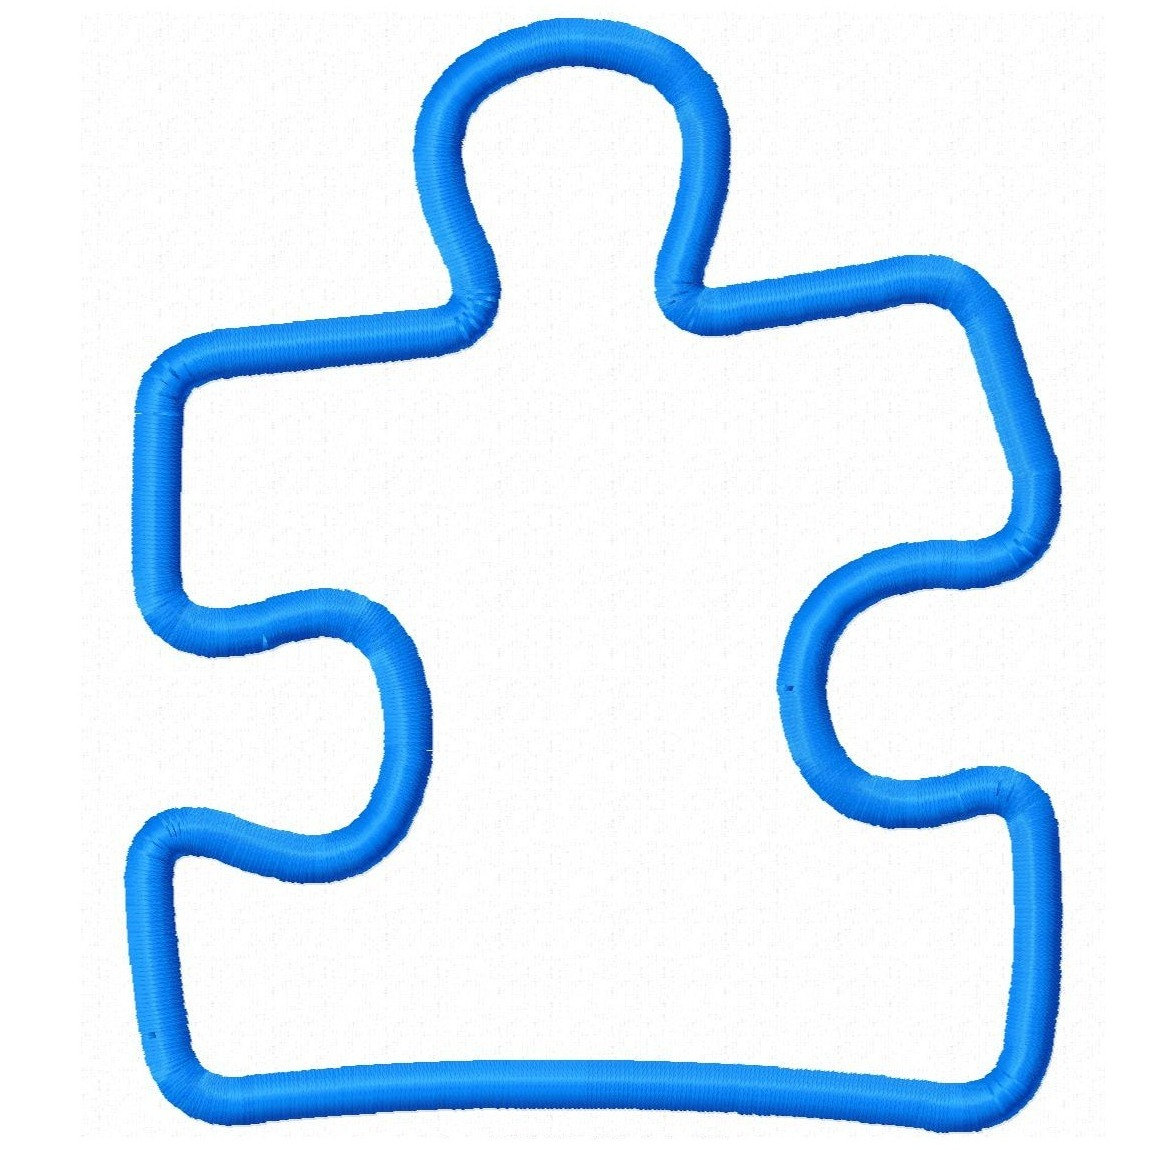 39 Puzzle Piece Image Free Cliparts That You Can Download To You